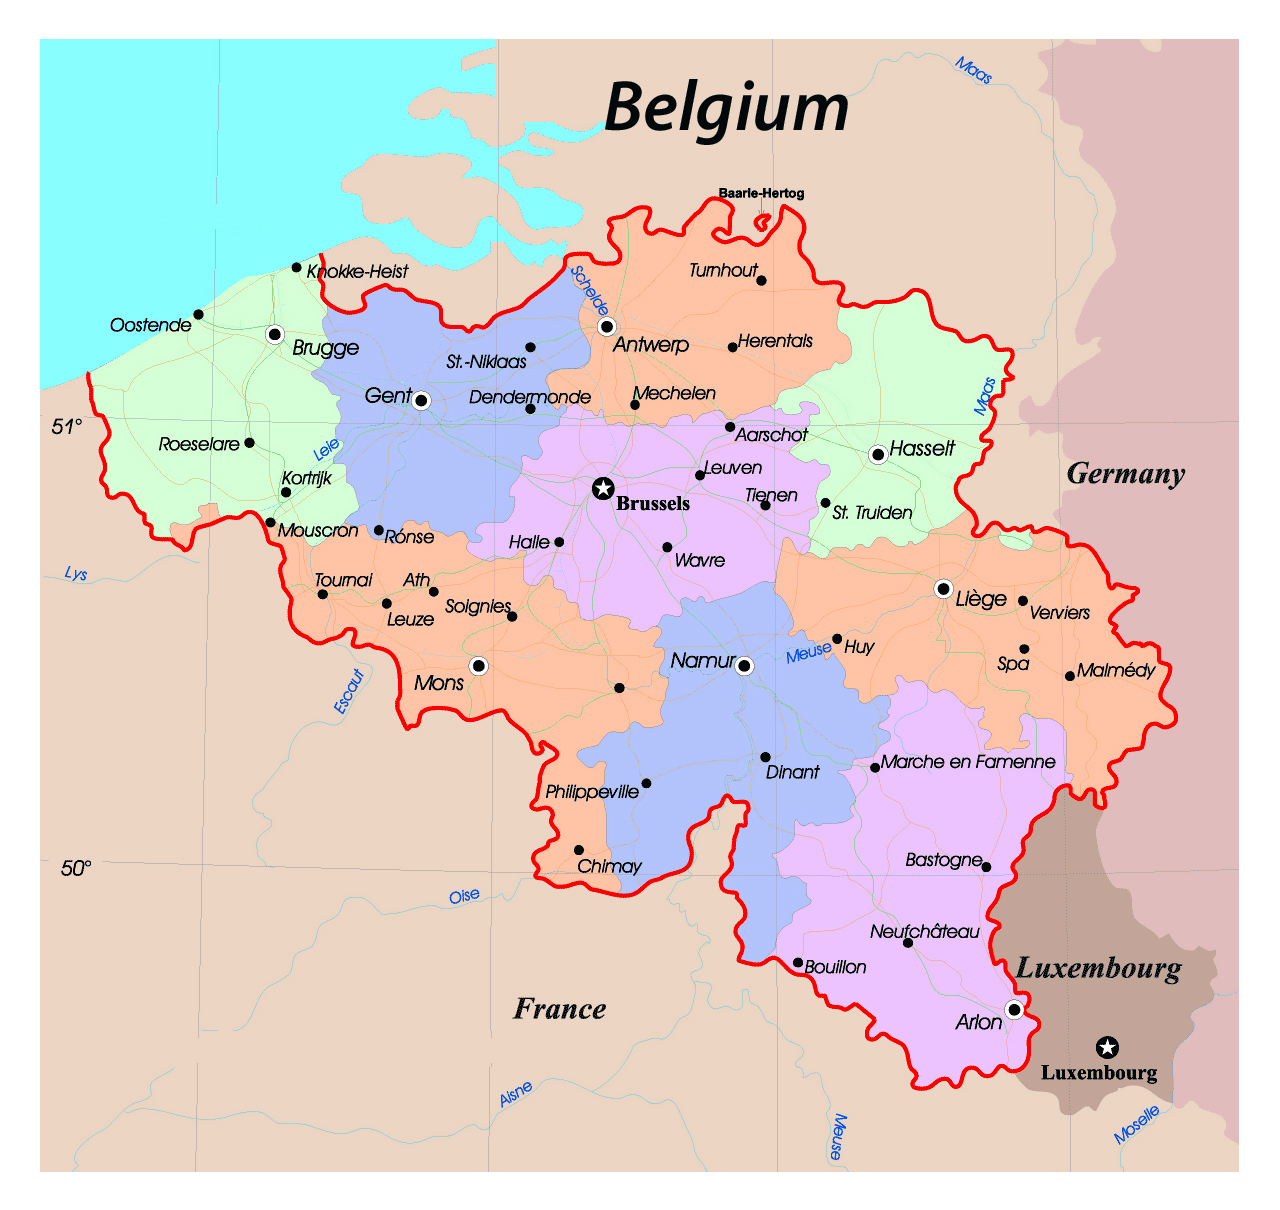 detailed-administrative-map-of-belgium-with-roads-and-major-cities-belgium-europe-mapsland